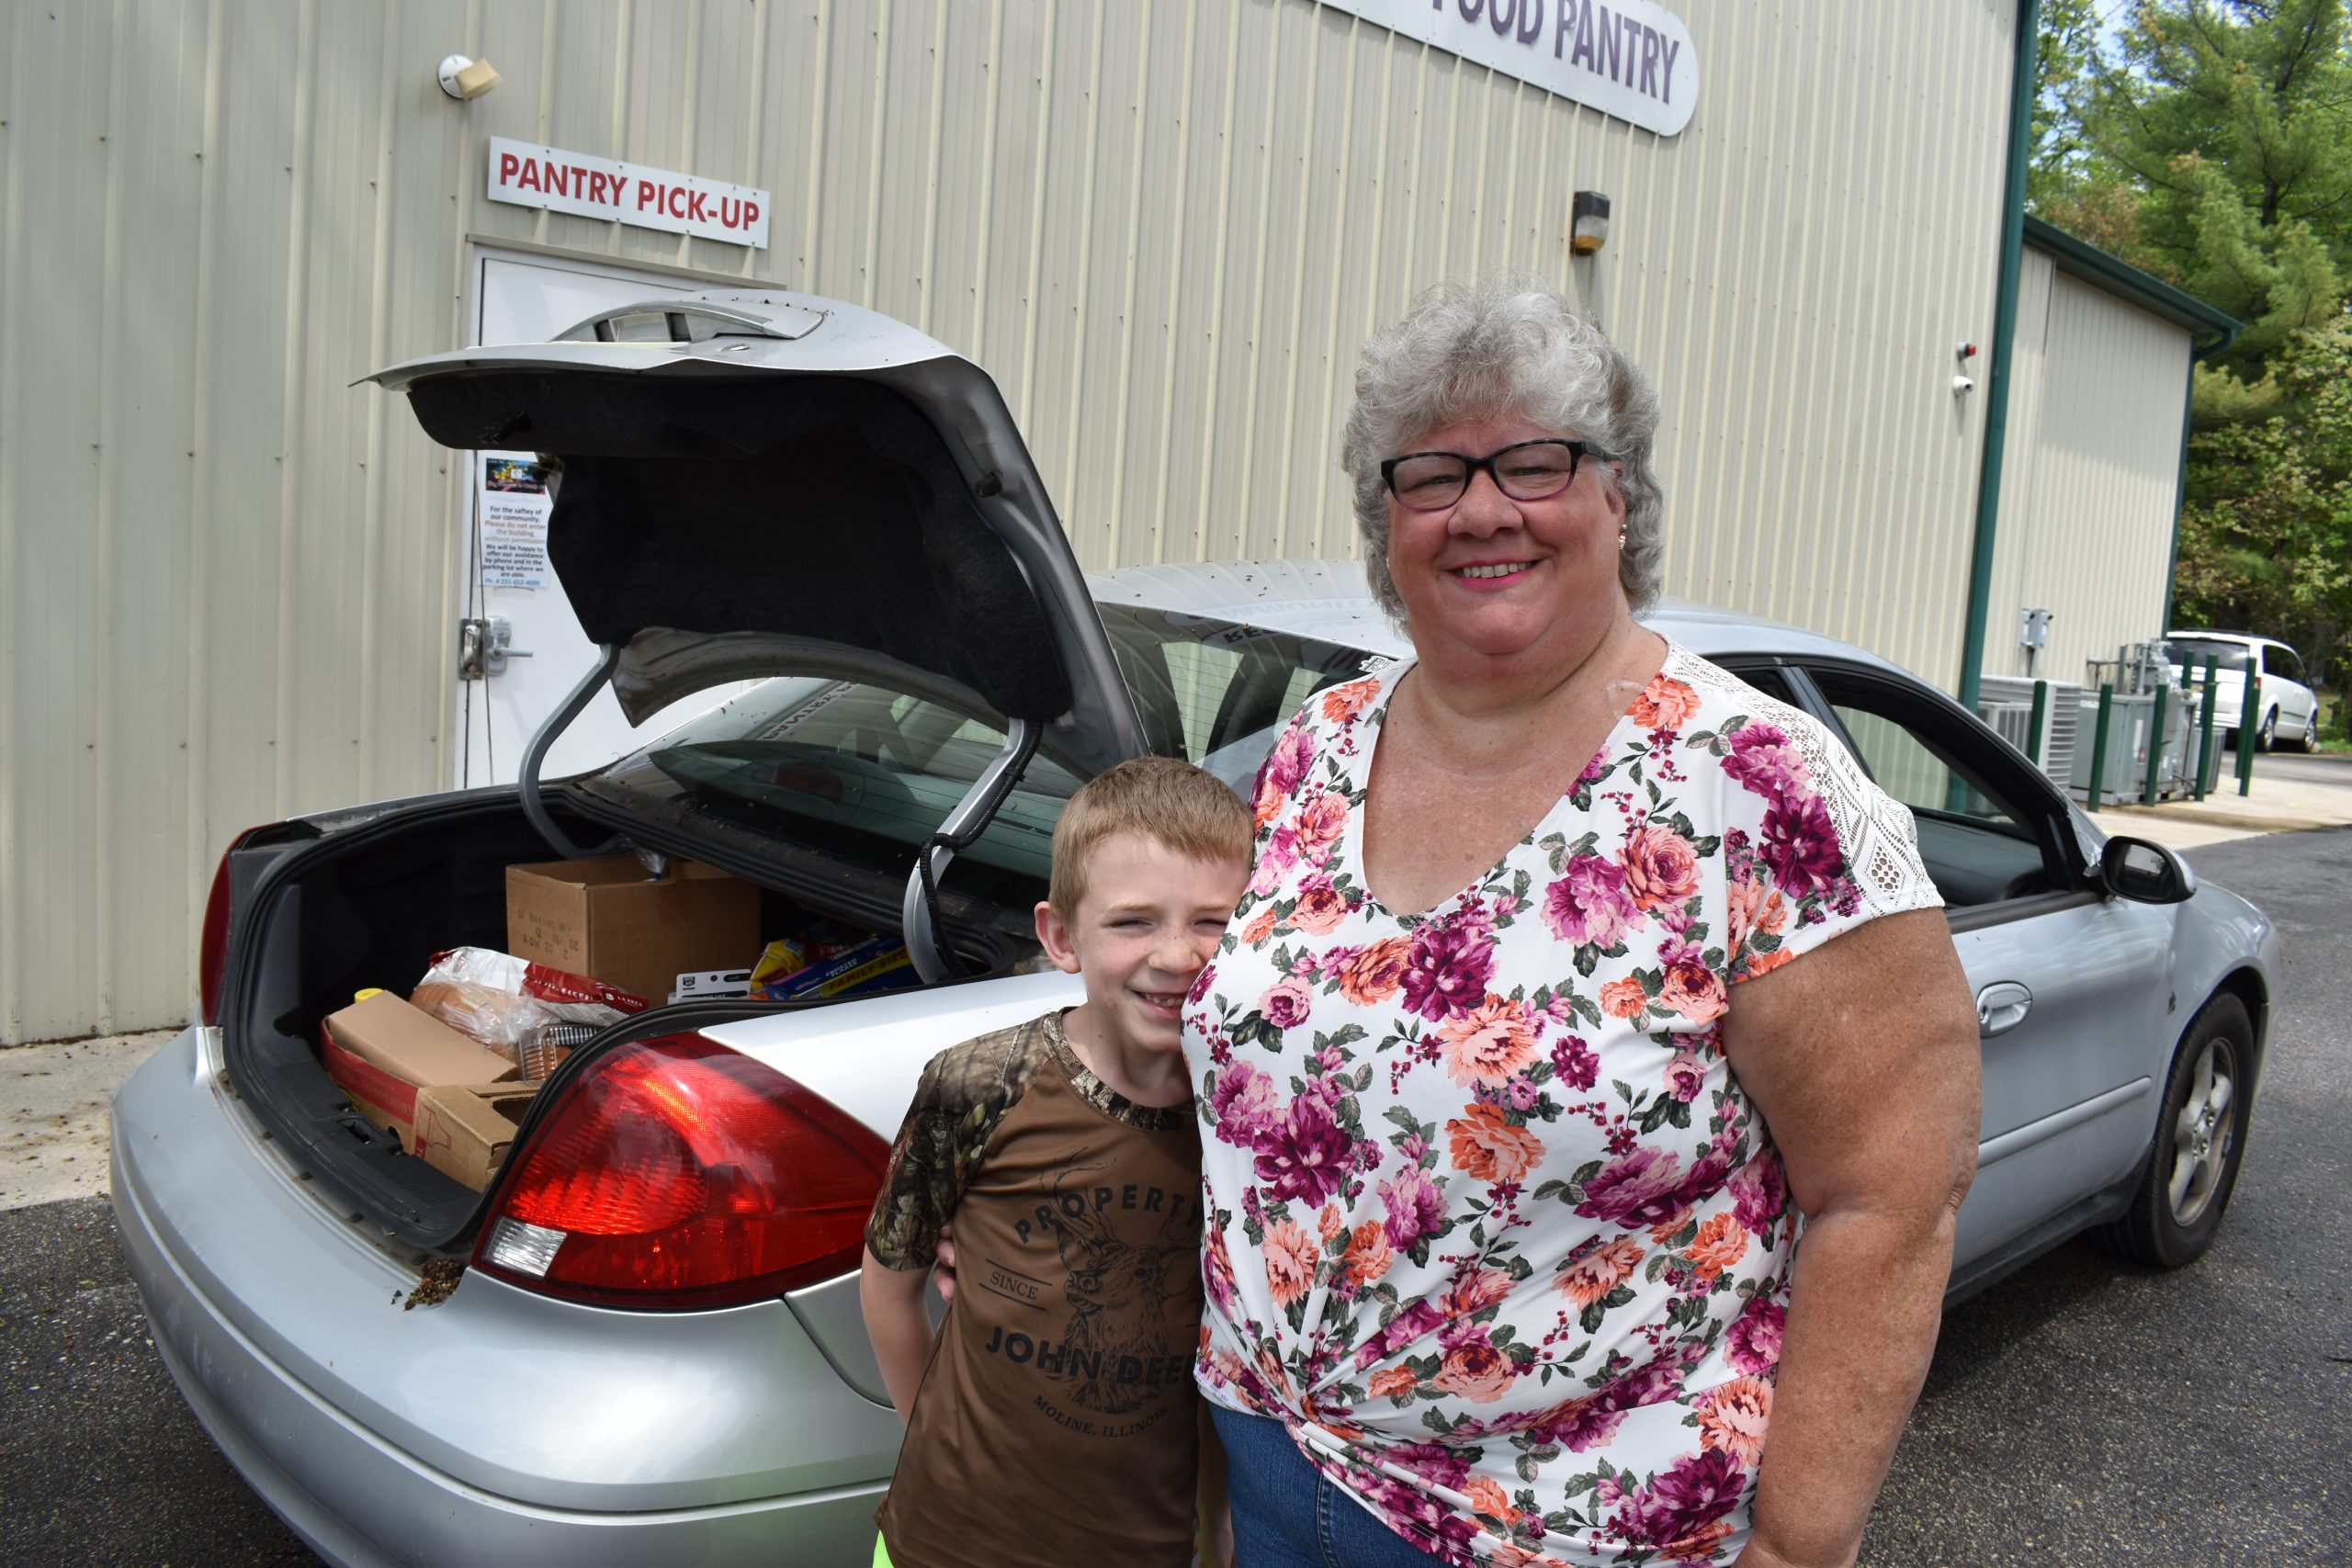 Theresa and her grandson stand in front of their car after receiving food.